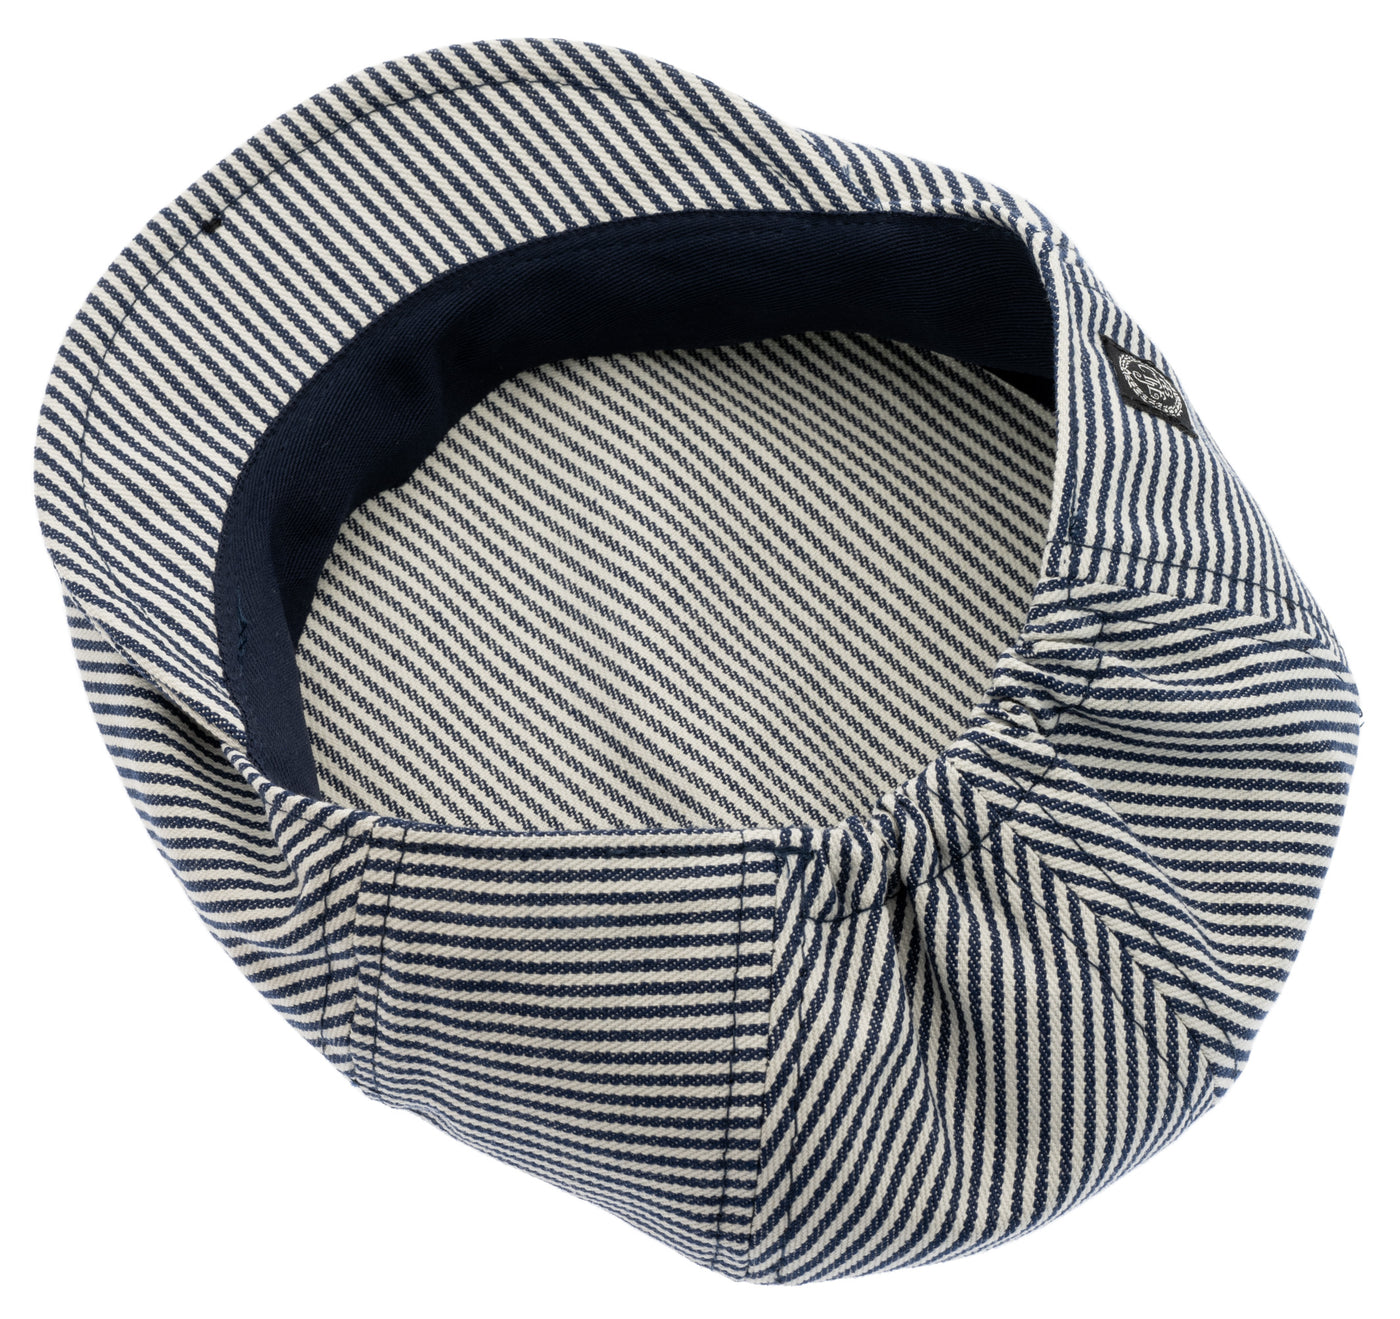 Summer Flat cap for kids with blue stripes